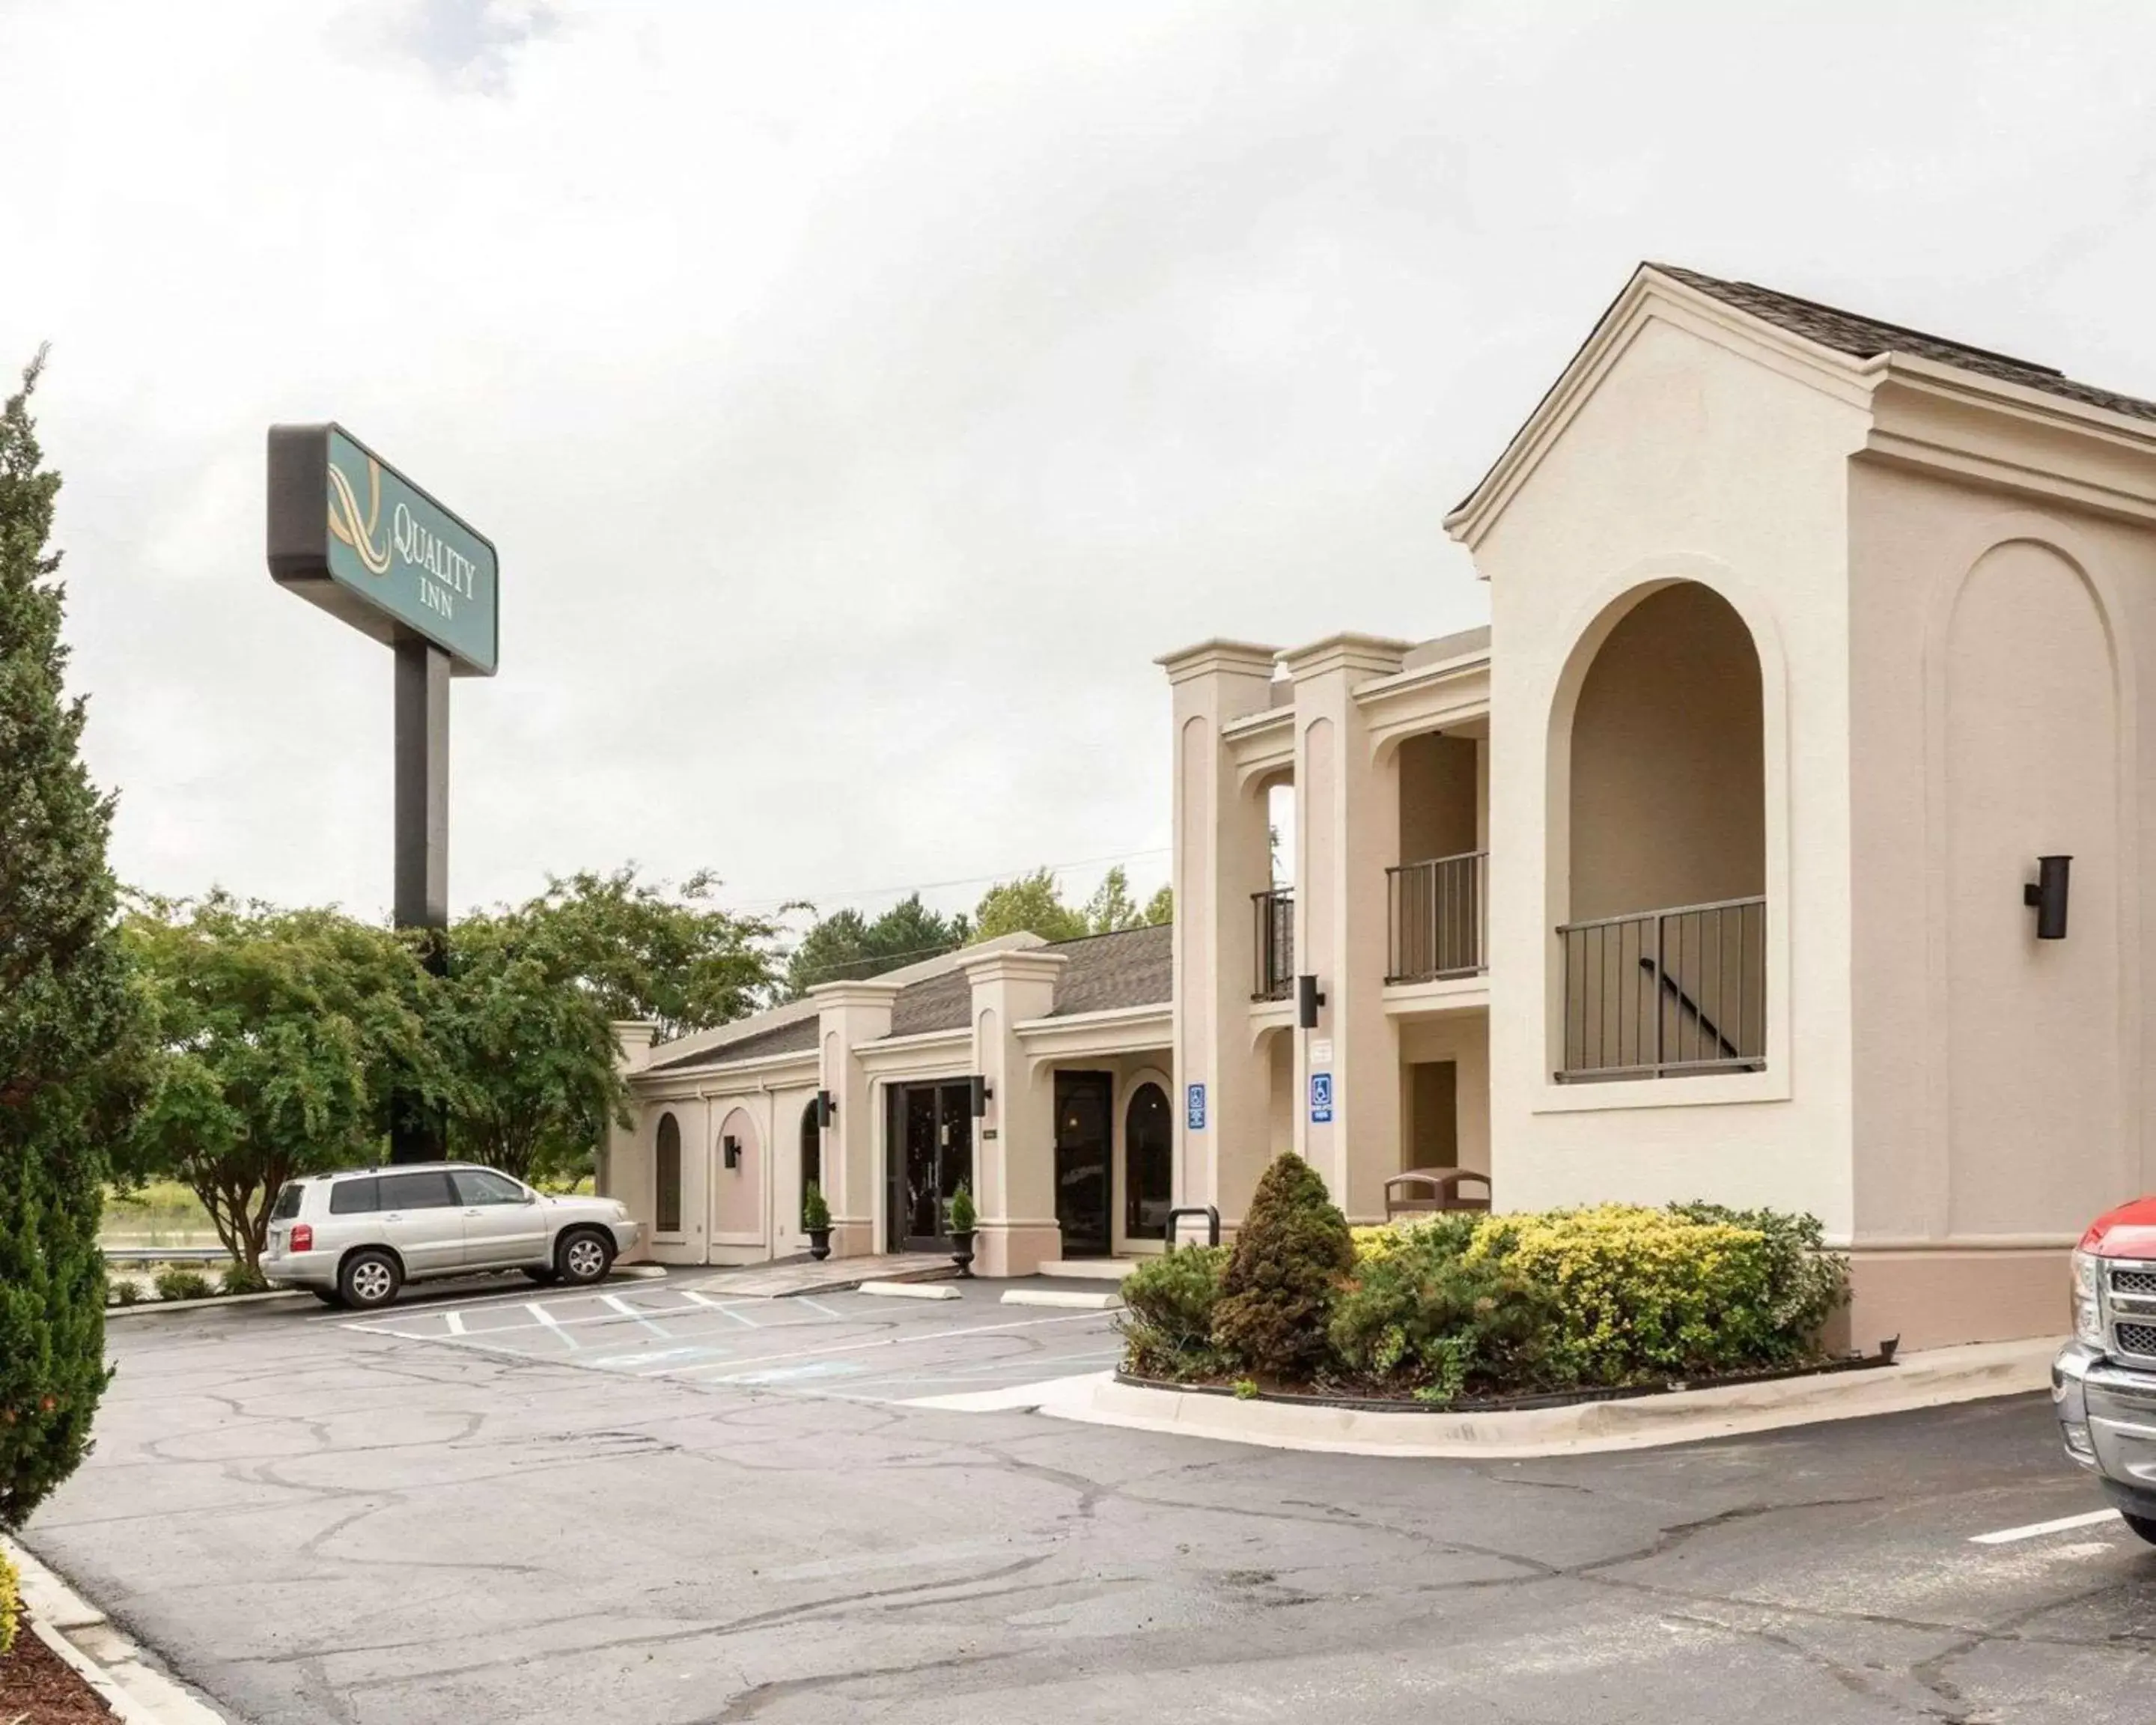 Property Building in Quality Inn South Hill I-85